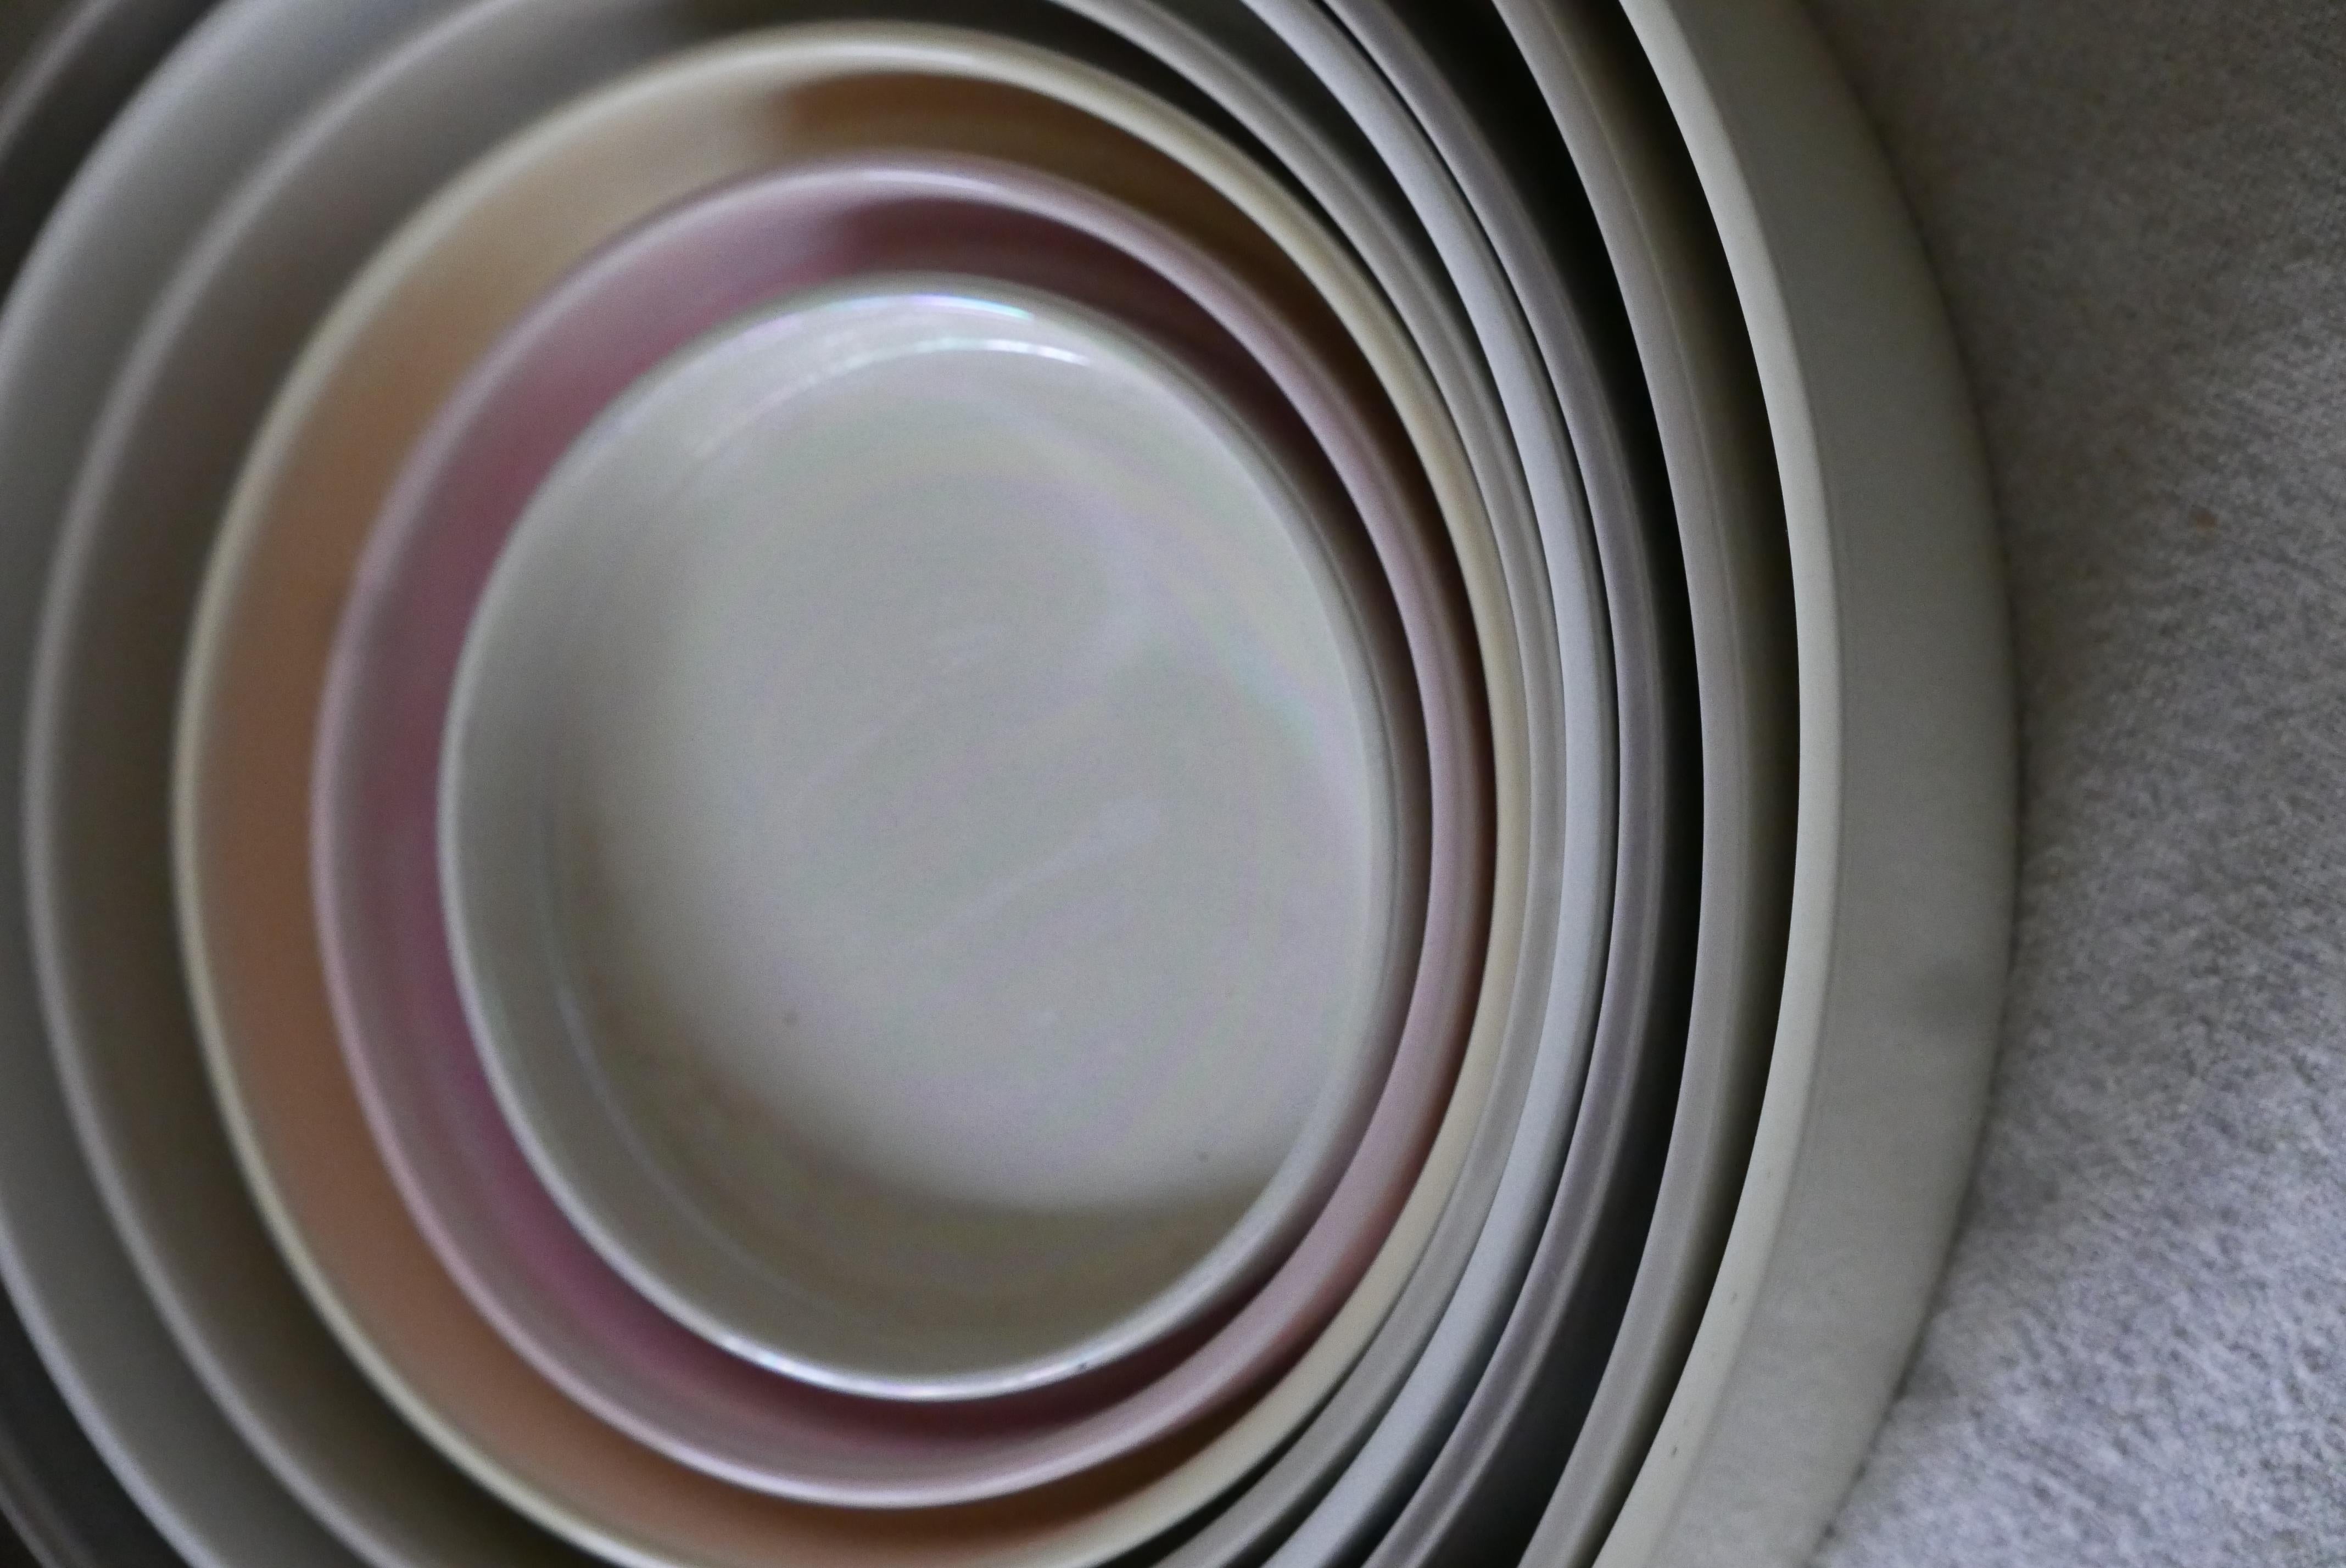 Italian 21st Century Ceramic Set Serving Plates Neutral and Warm Tones Made in Italy For Sale